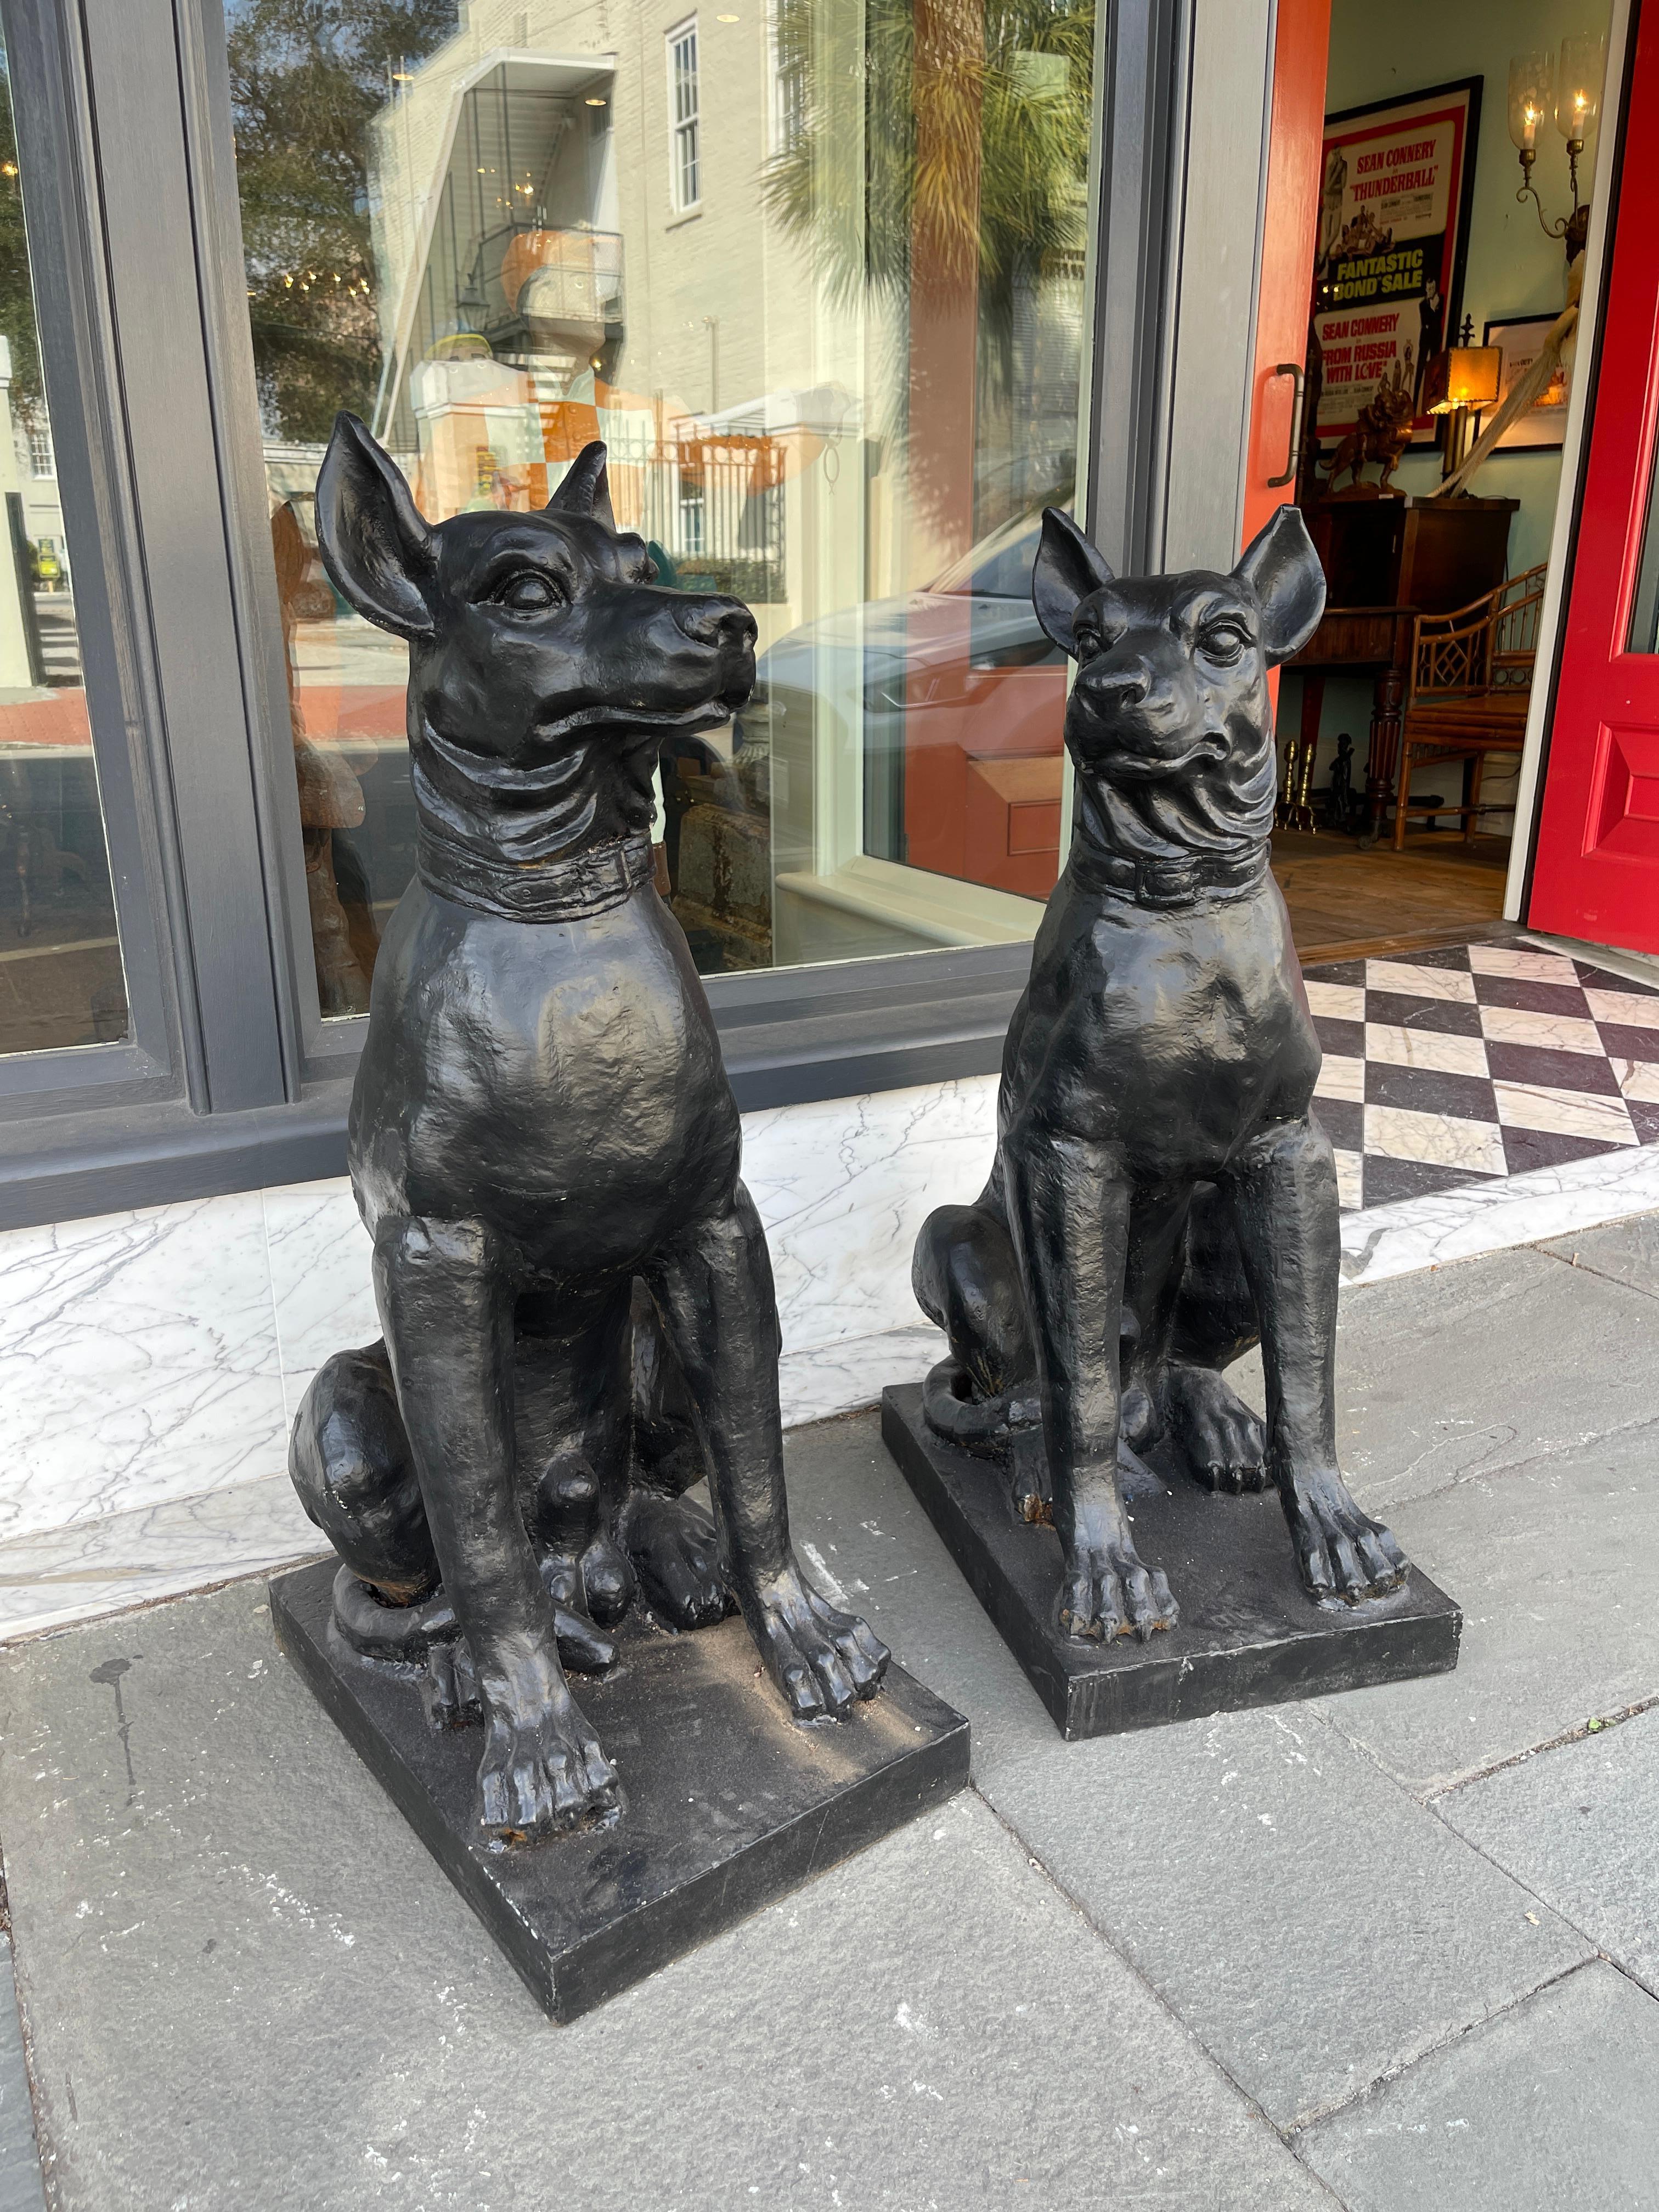 Pair of 19th century cast iron dogs. Monumental in stature. Seated on rectangular base alertly watching. Adorned collar. True pair not assembled.